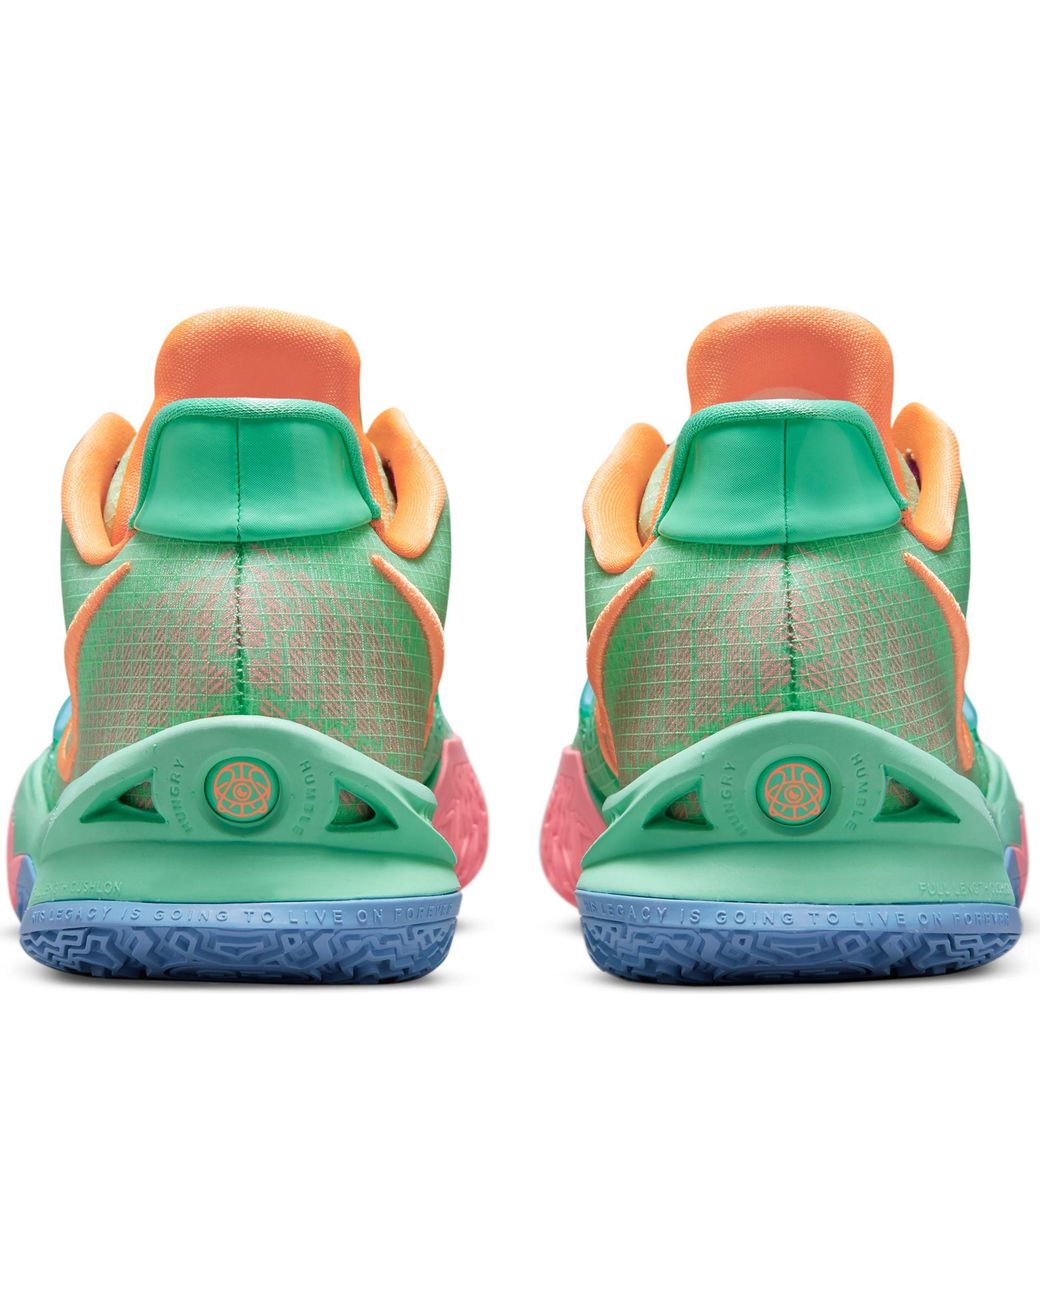 Nike Rubber Kyrie Low 4 Basketball Shoes in Green/Orange (Green) | Lyst